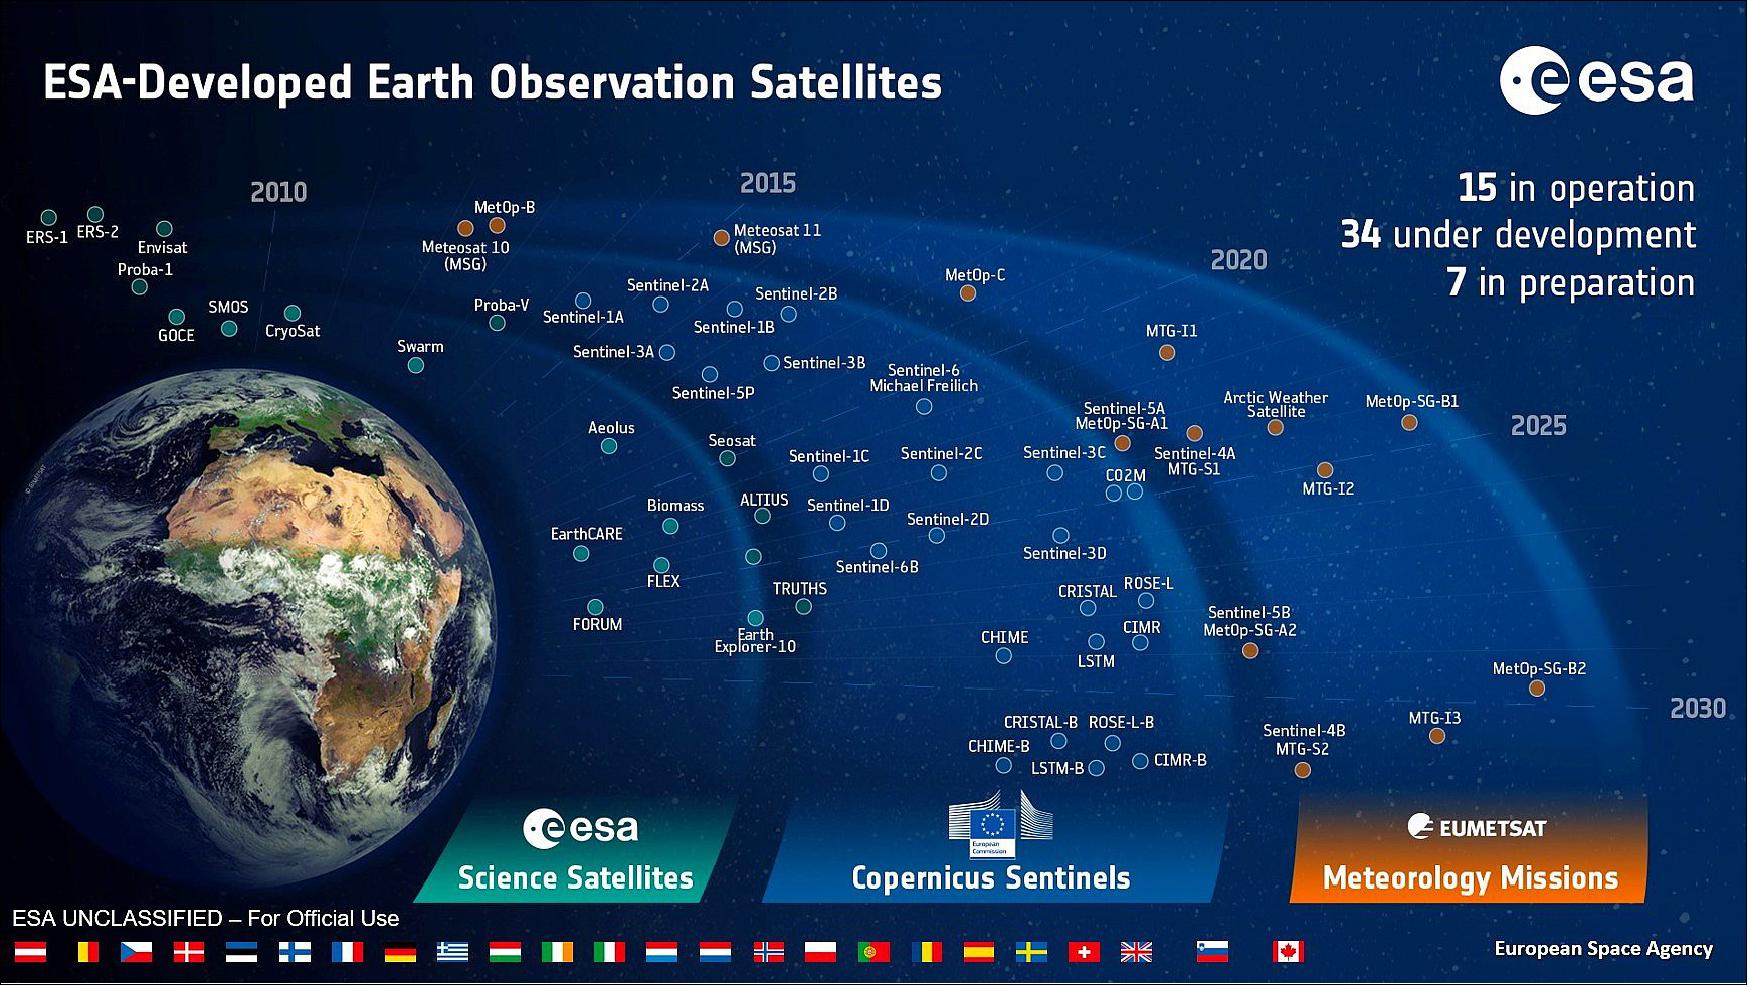 Figure 5: ESA’s Earth Observation Programmes can be grouped into three main categories: operational Sentinel satellites in the context of the European Copernicus Programme, the scientific Earth Explorers, and the meteorological missions (image credit: ESA, Josef Aschbacher)